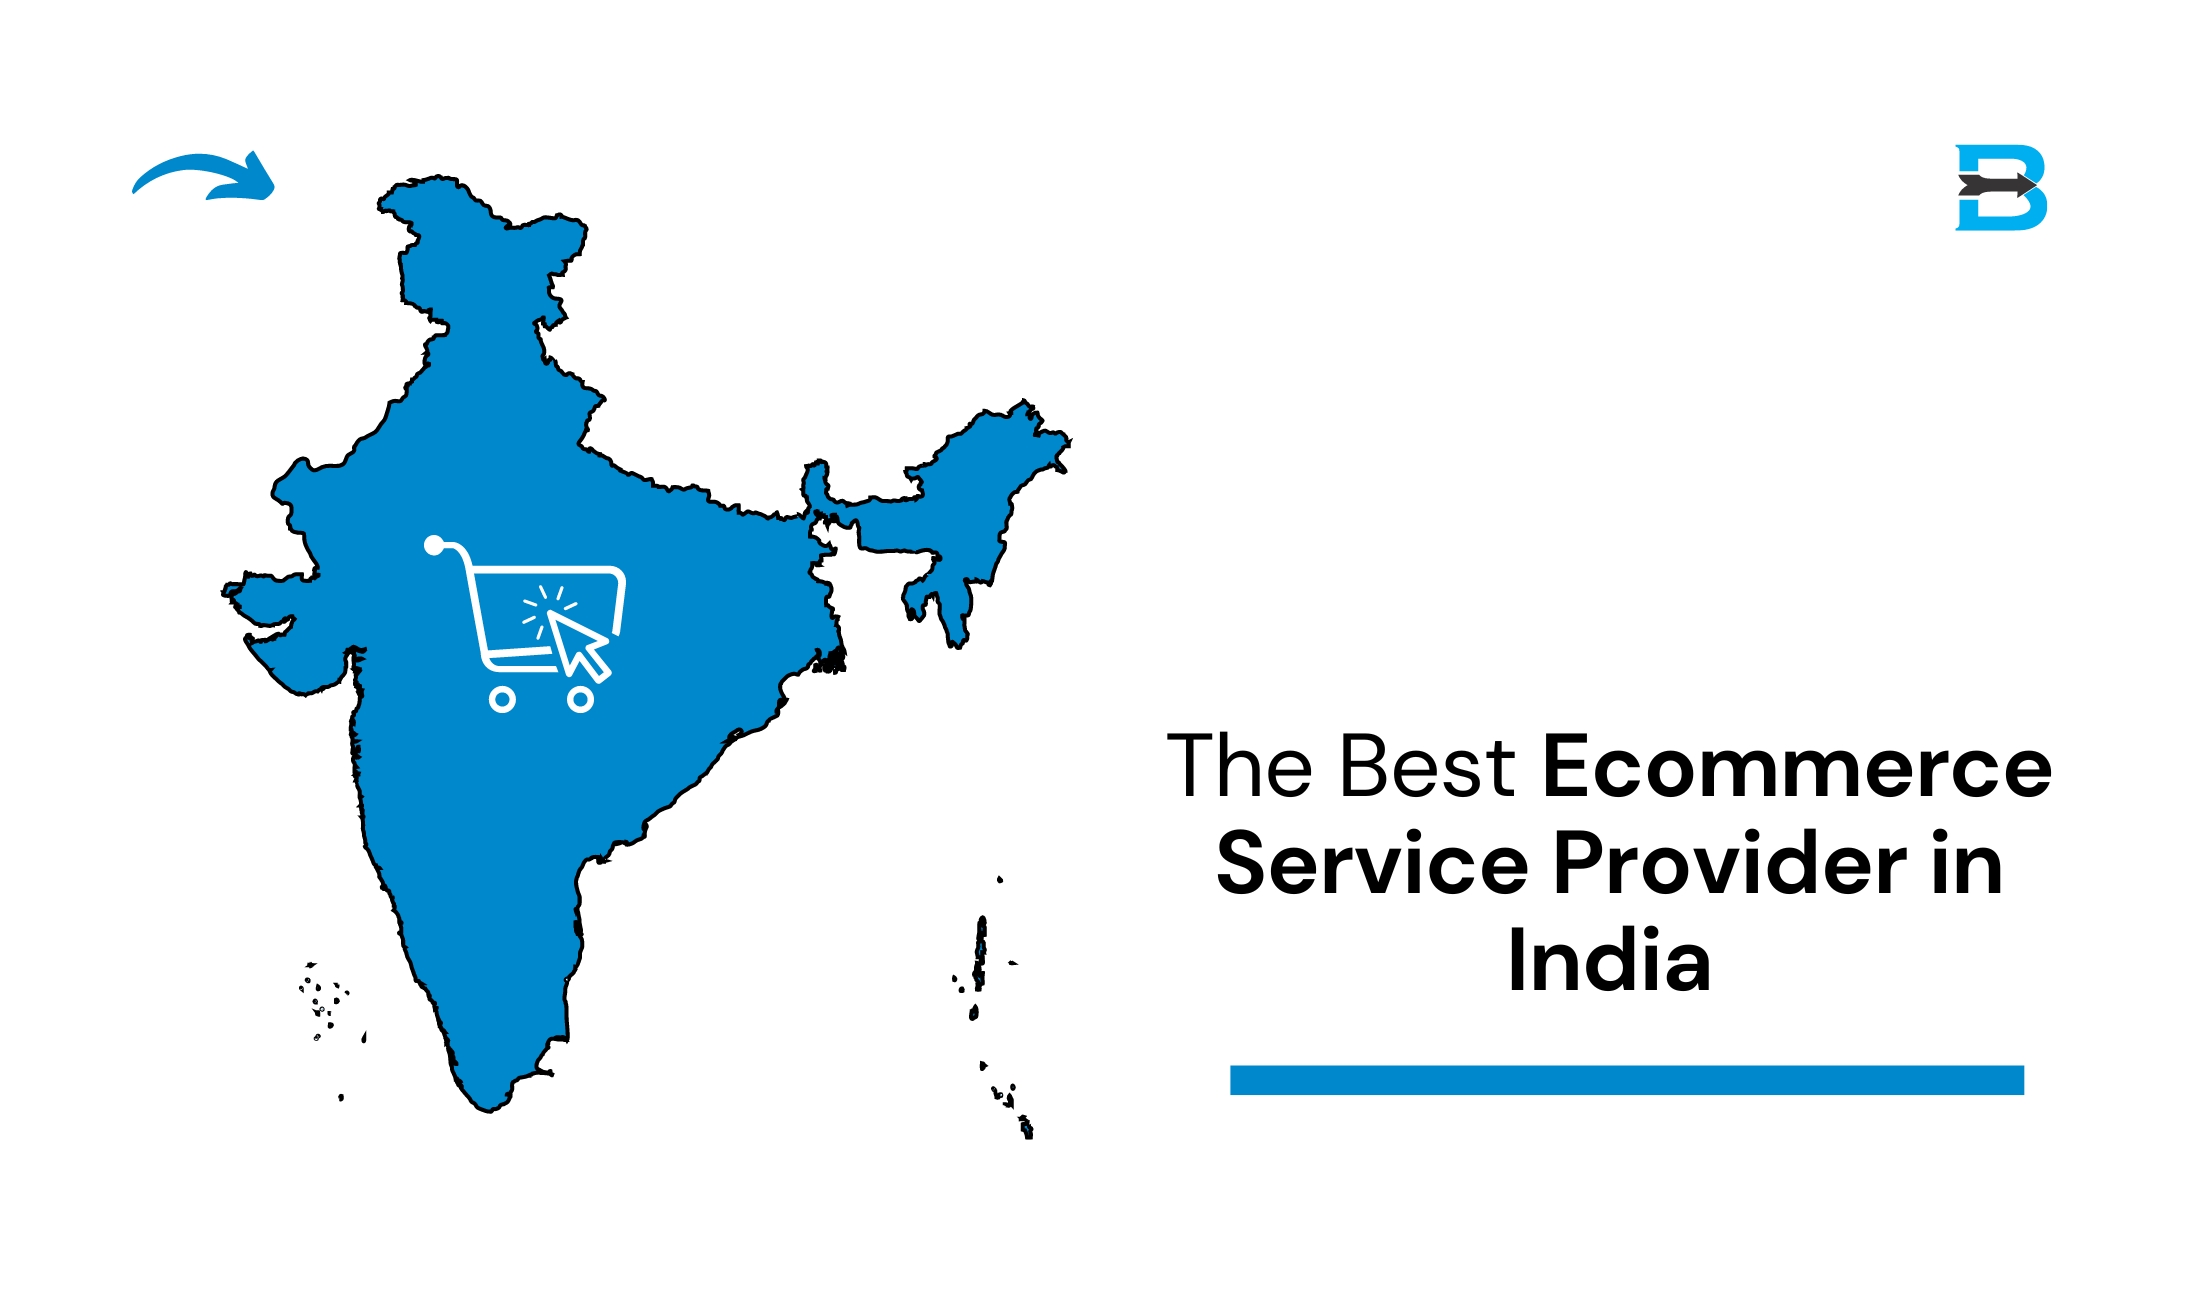 The Best Ecommerce Service Provider in India